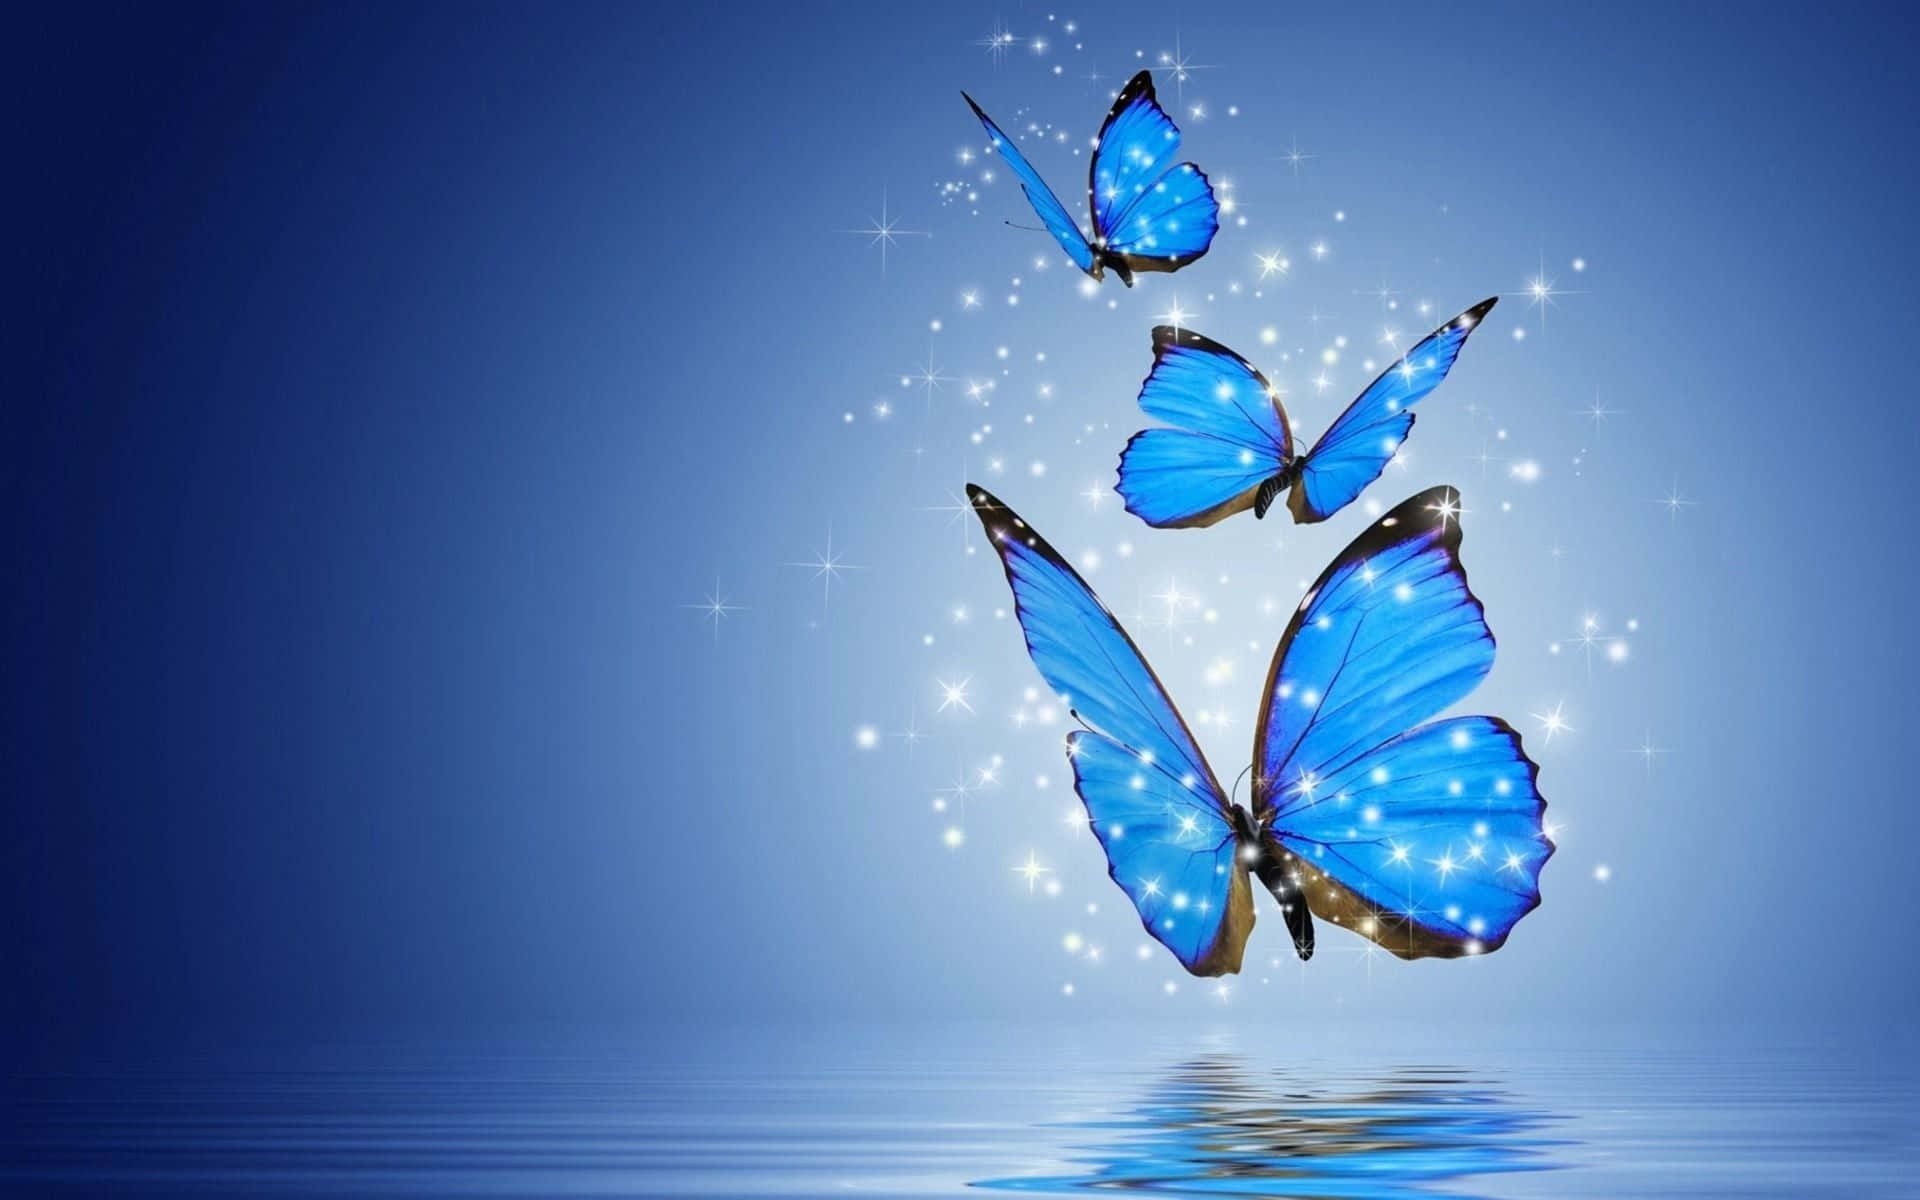 "The Brilliant Blue Butterfly"